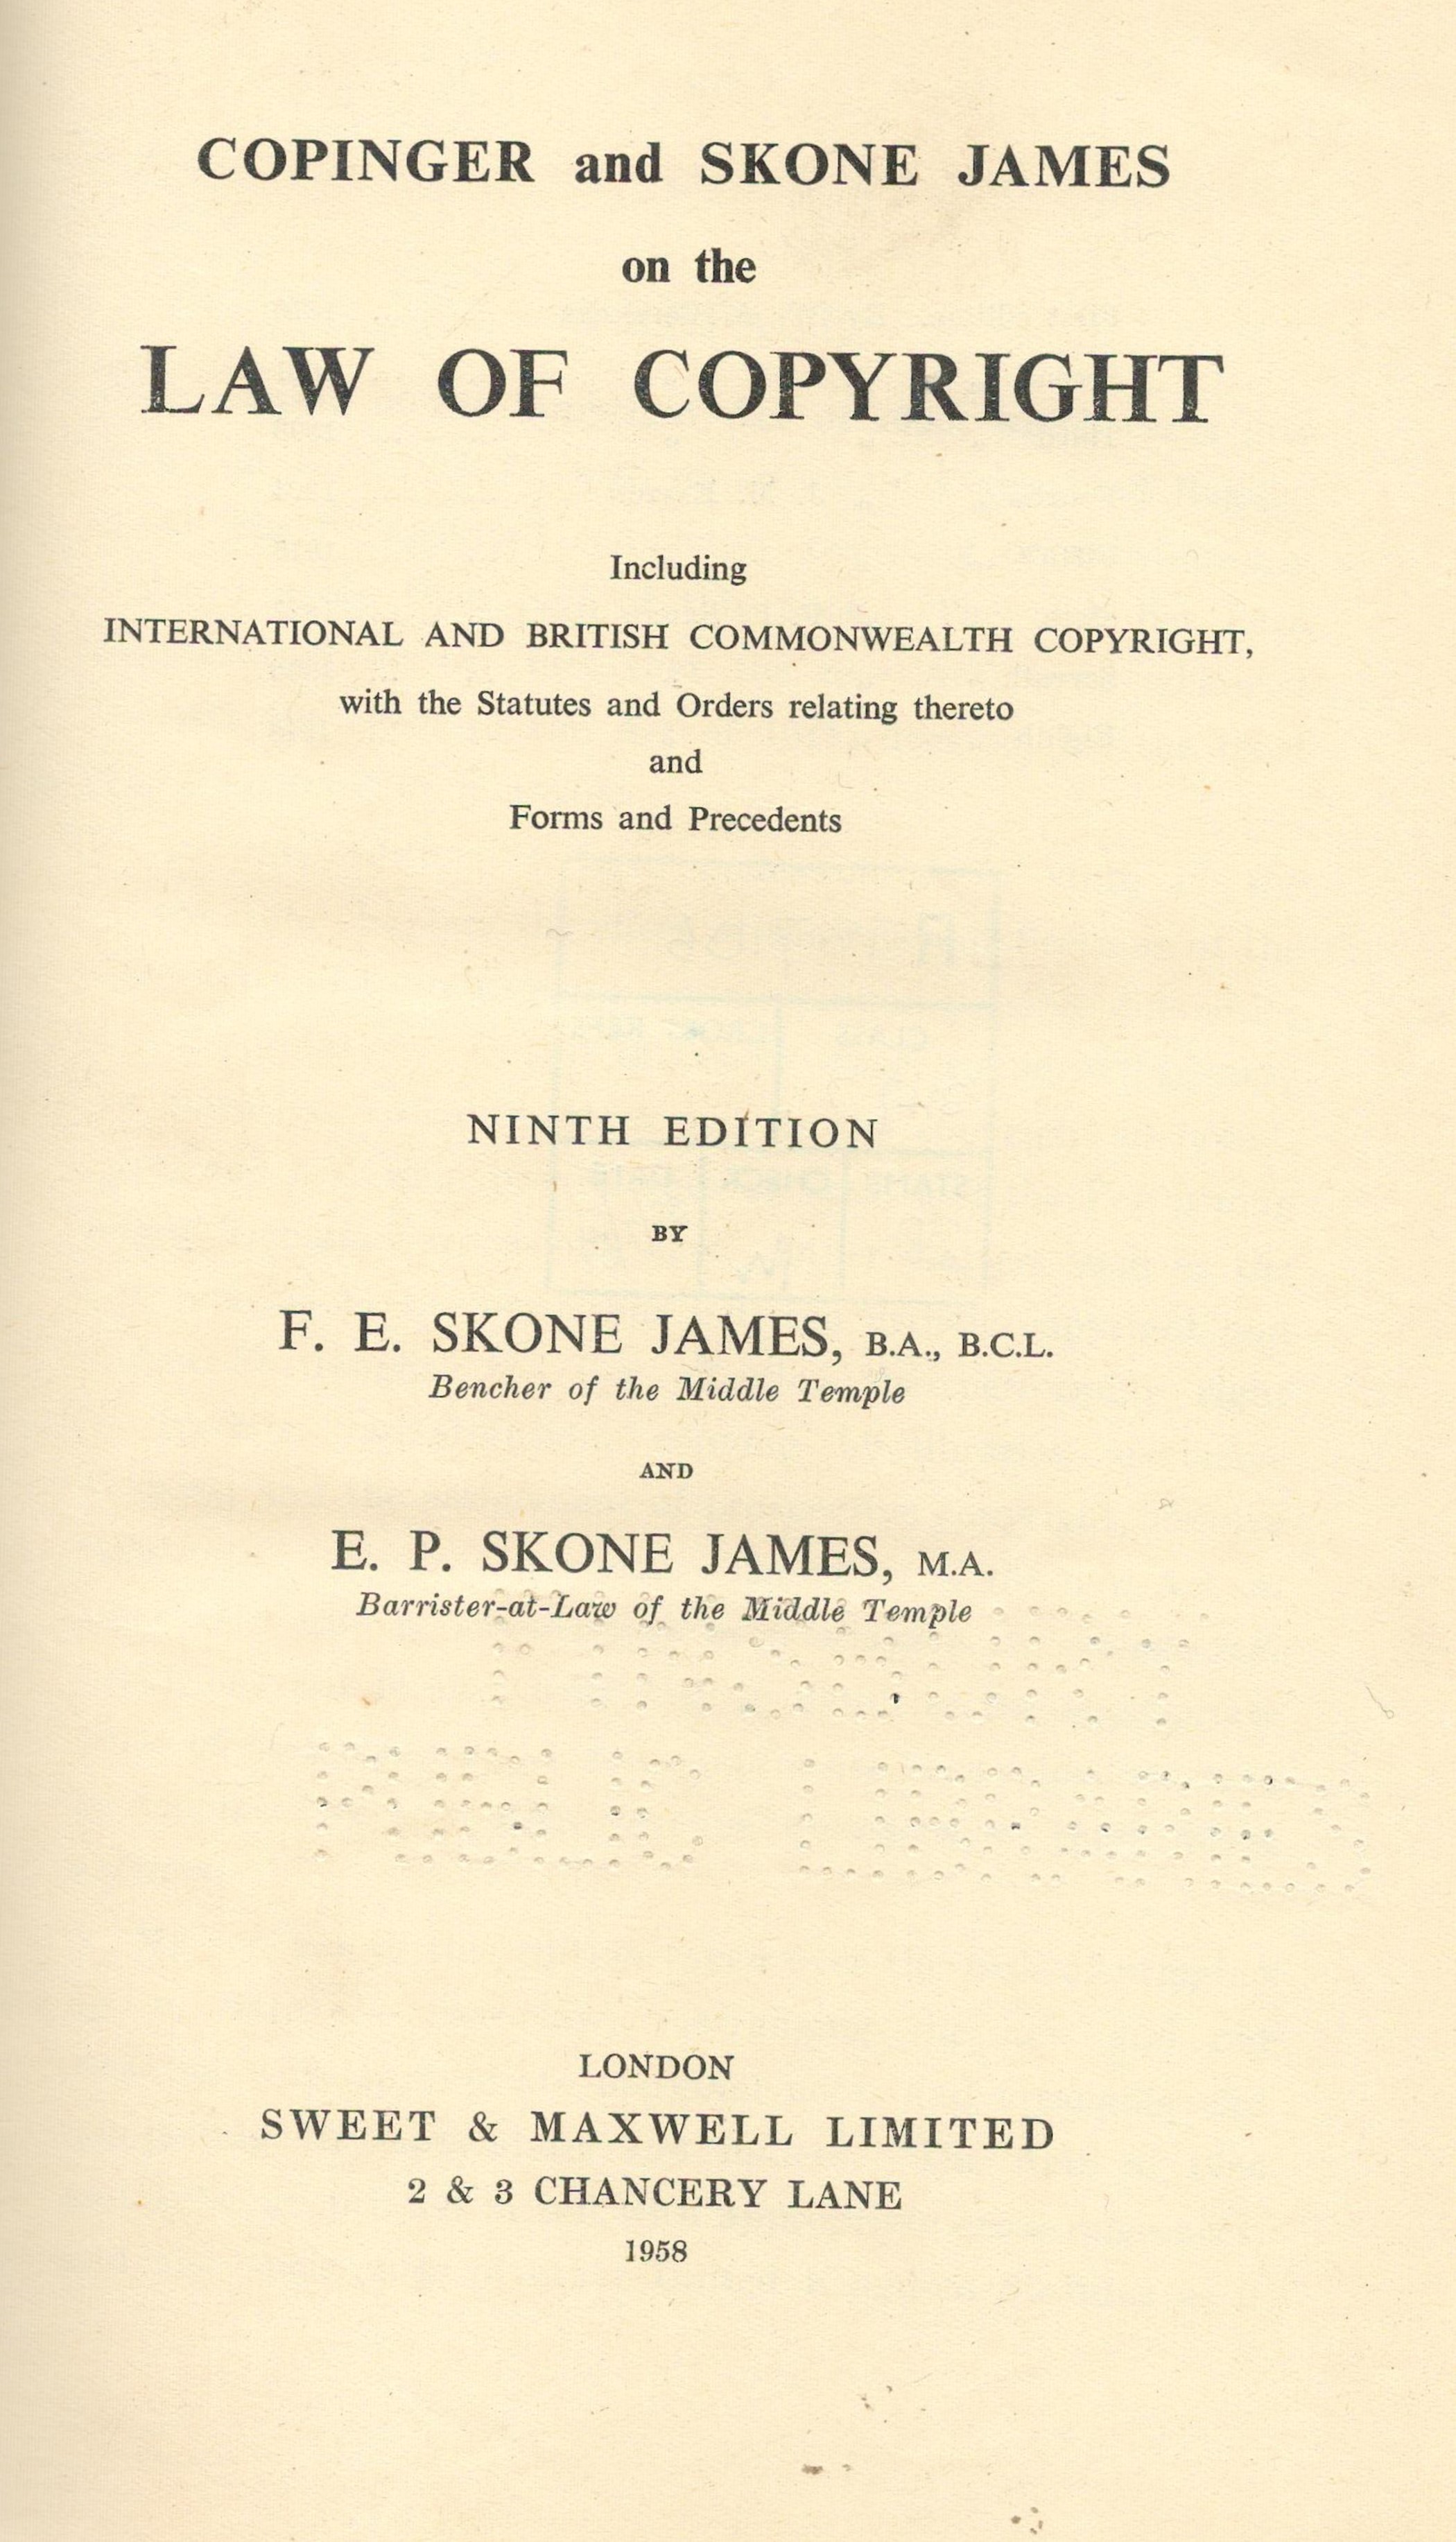 Copinger and Skone James on the Law of Copyright by F E Skone James 1958 Hardback Book ninth Edition - Image 2 of 3